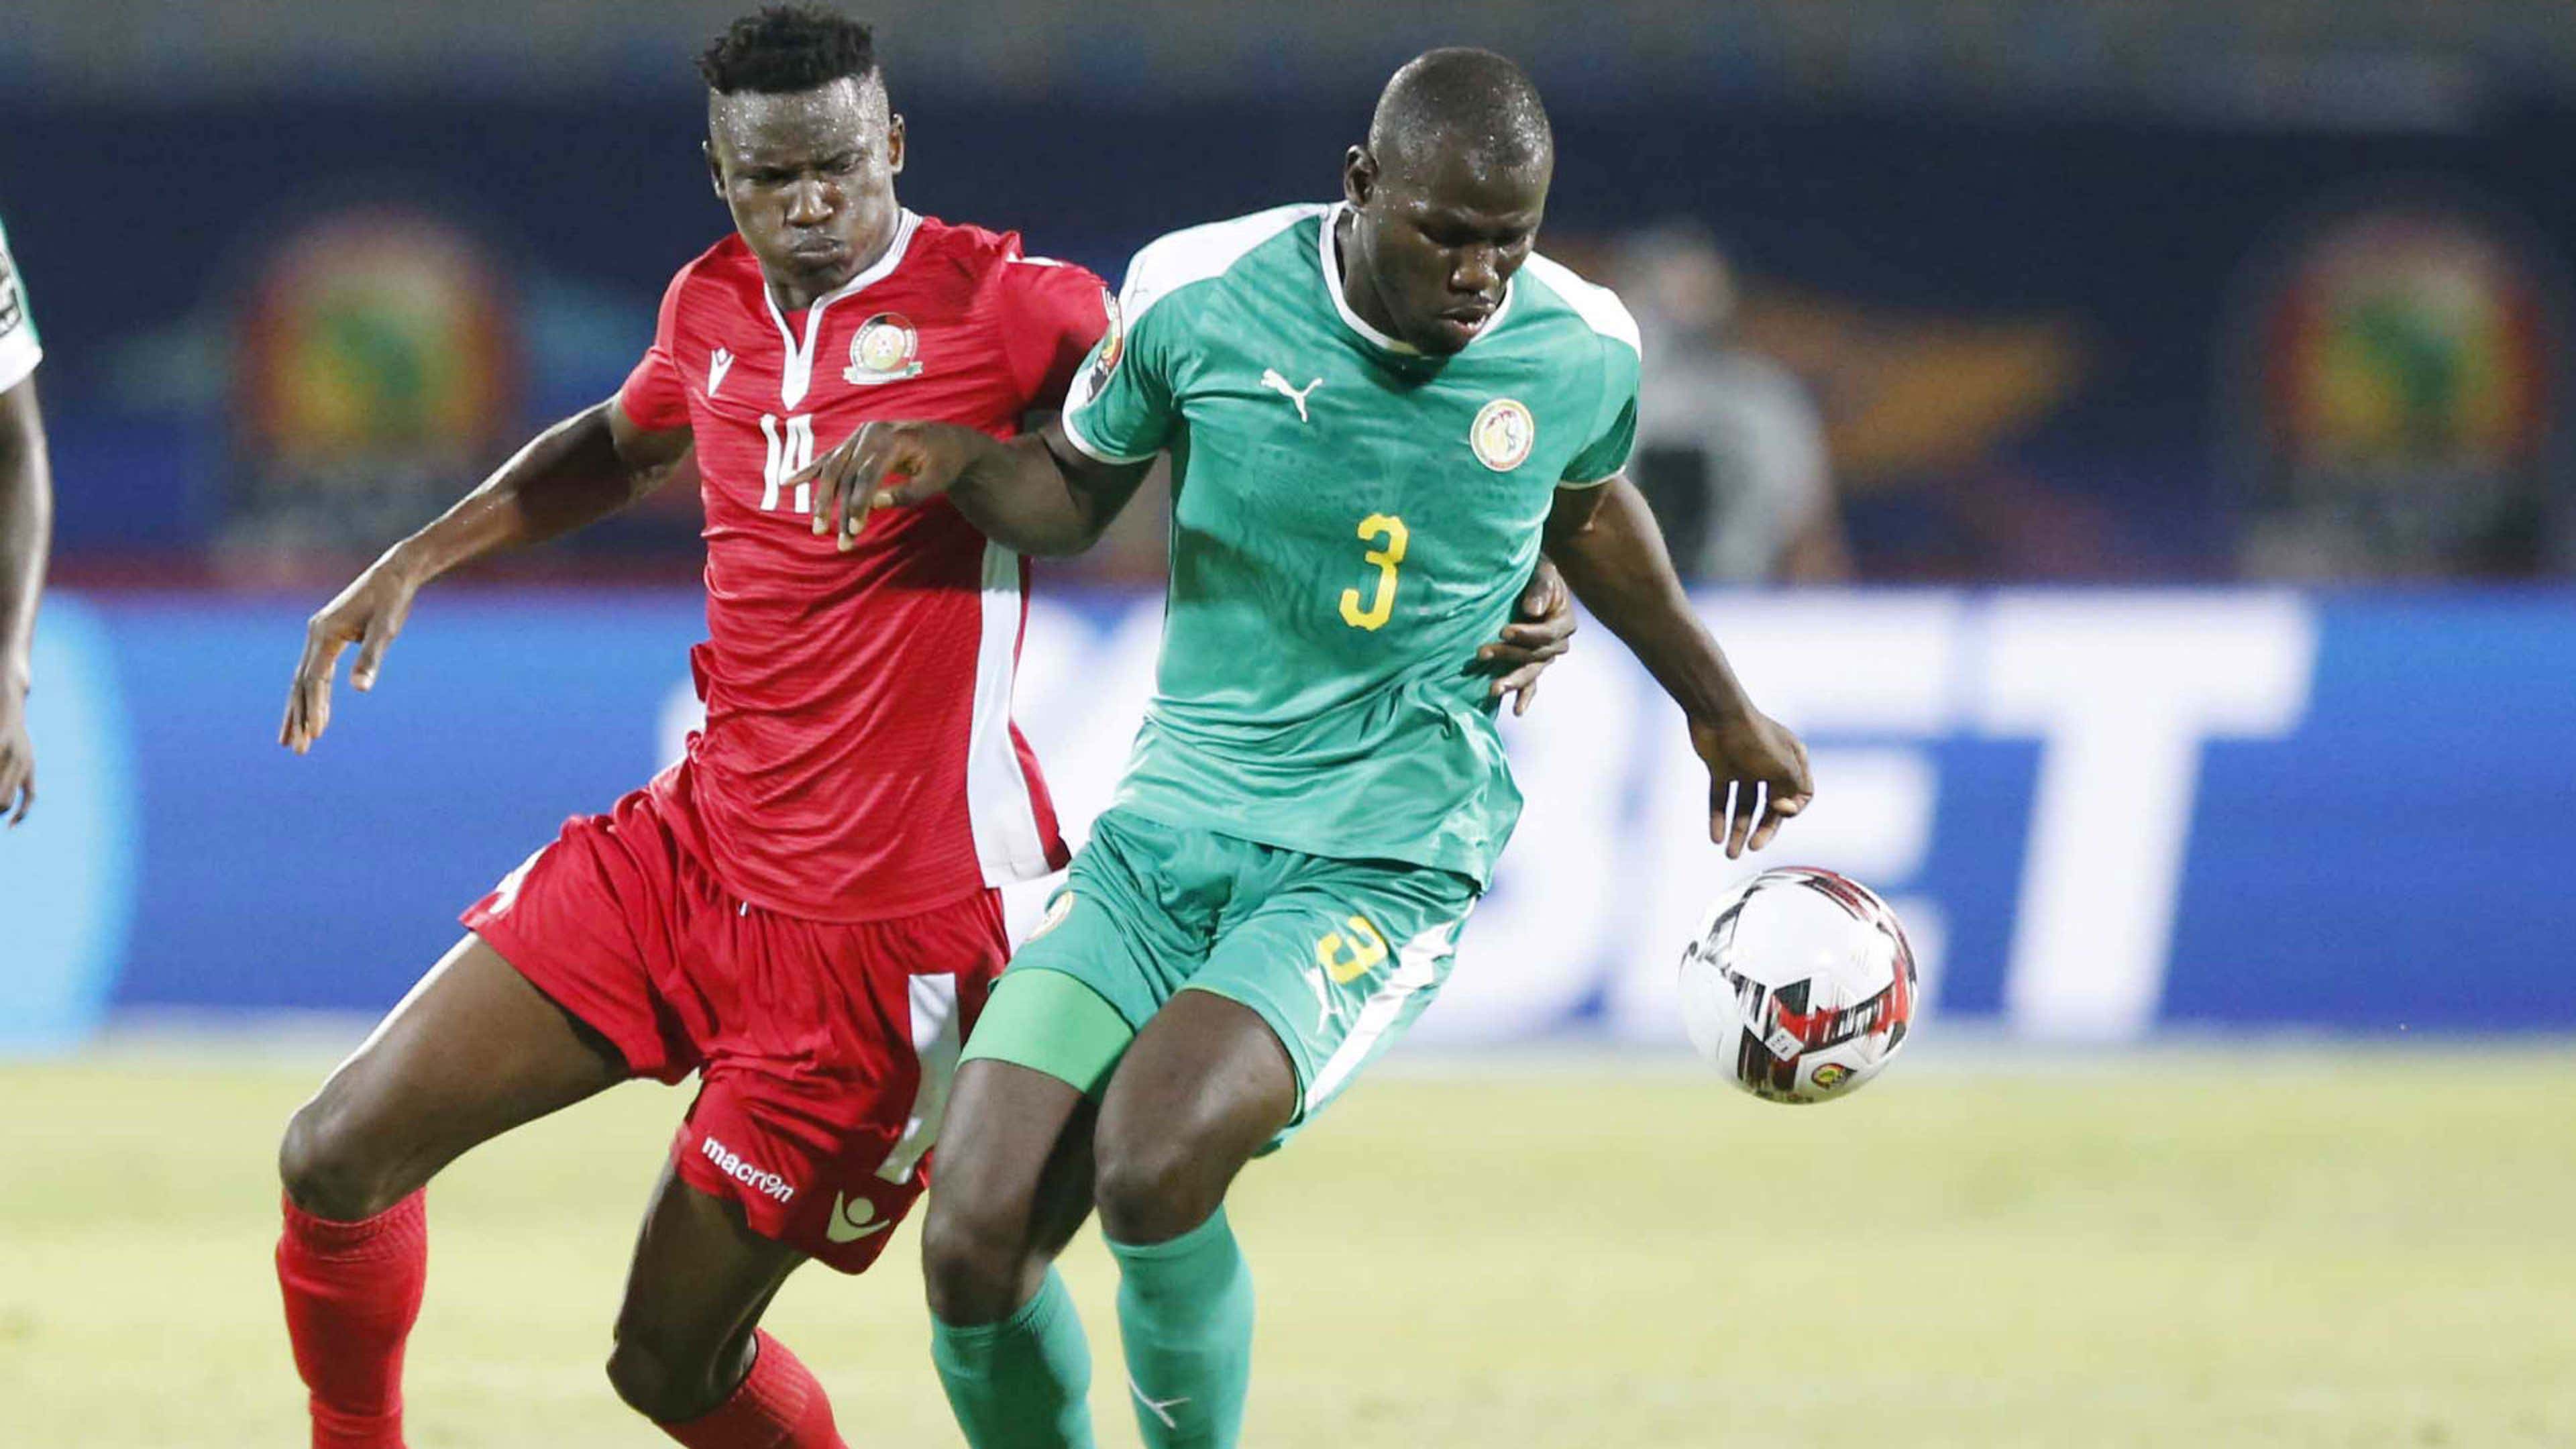 Harambee Stars Afcon jersey numbers revealed